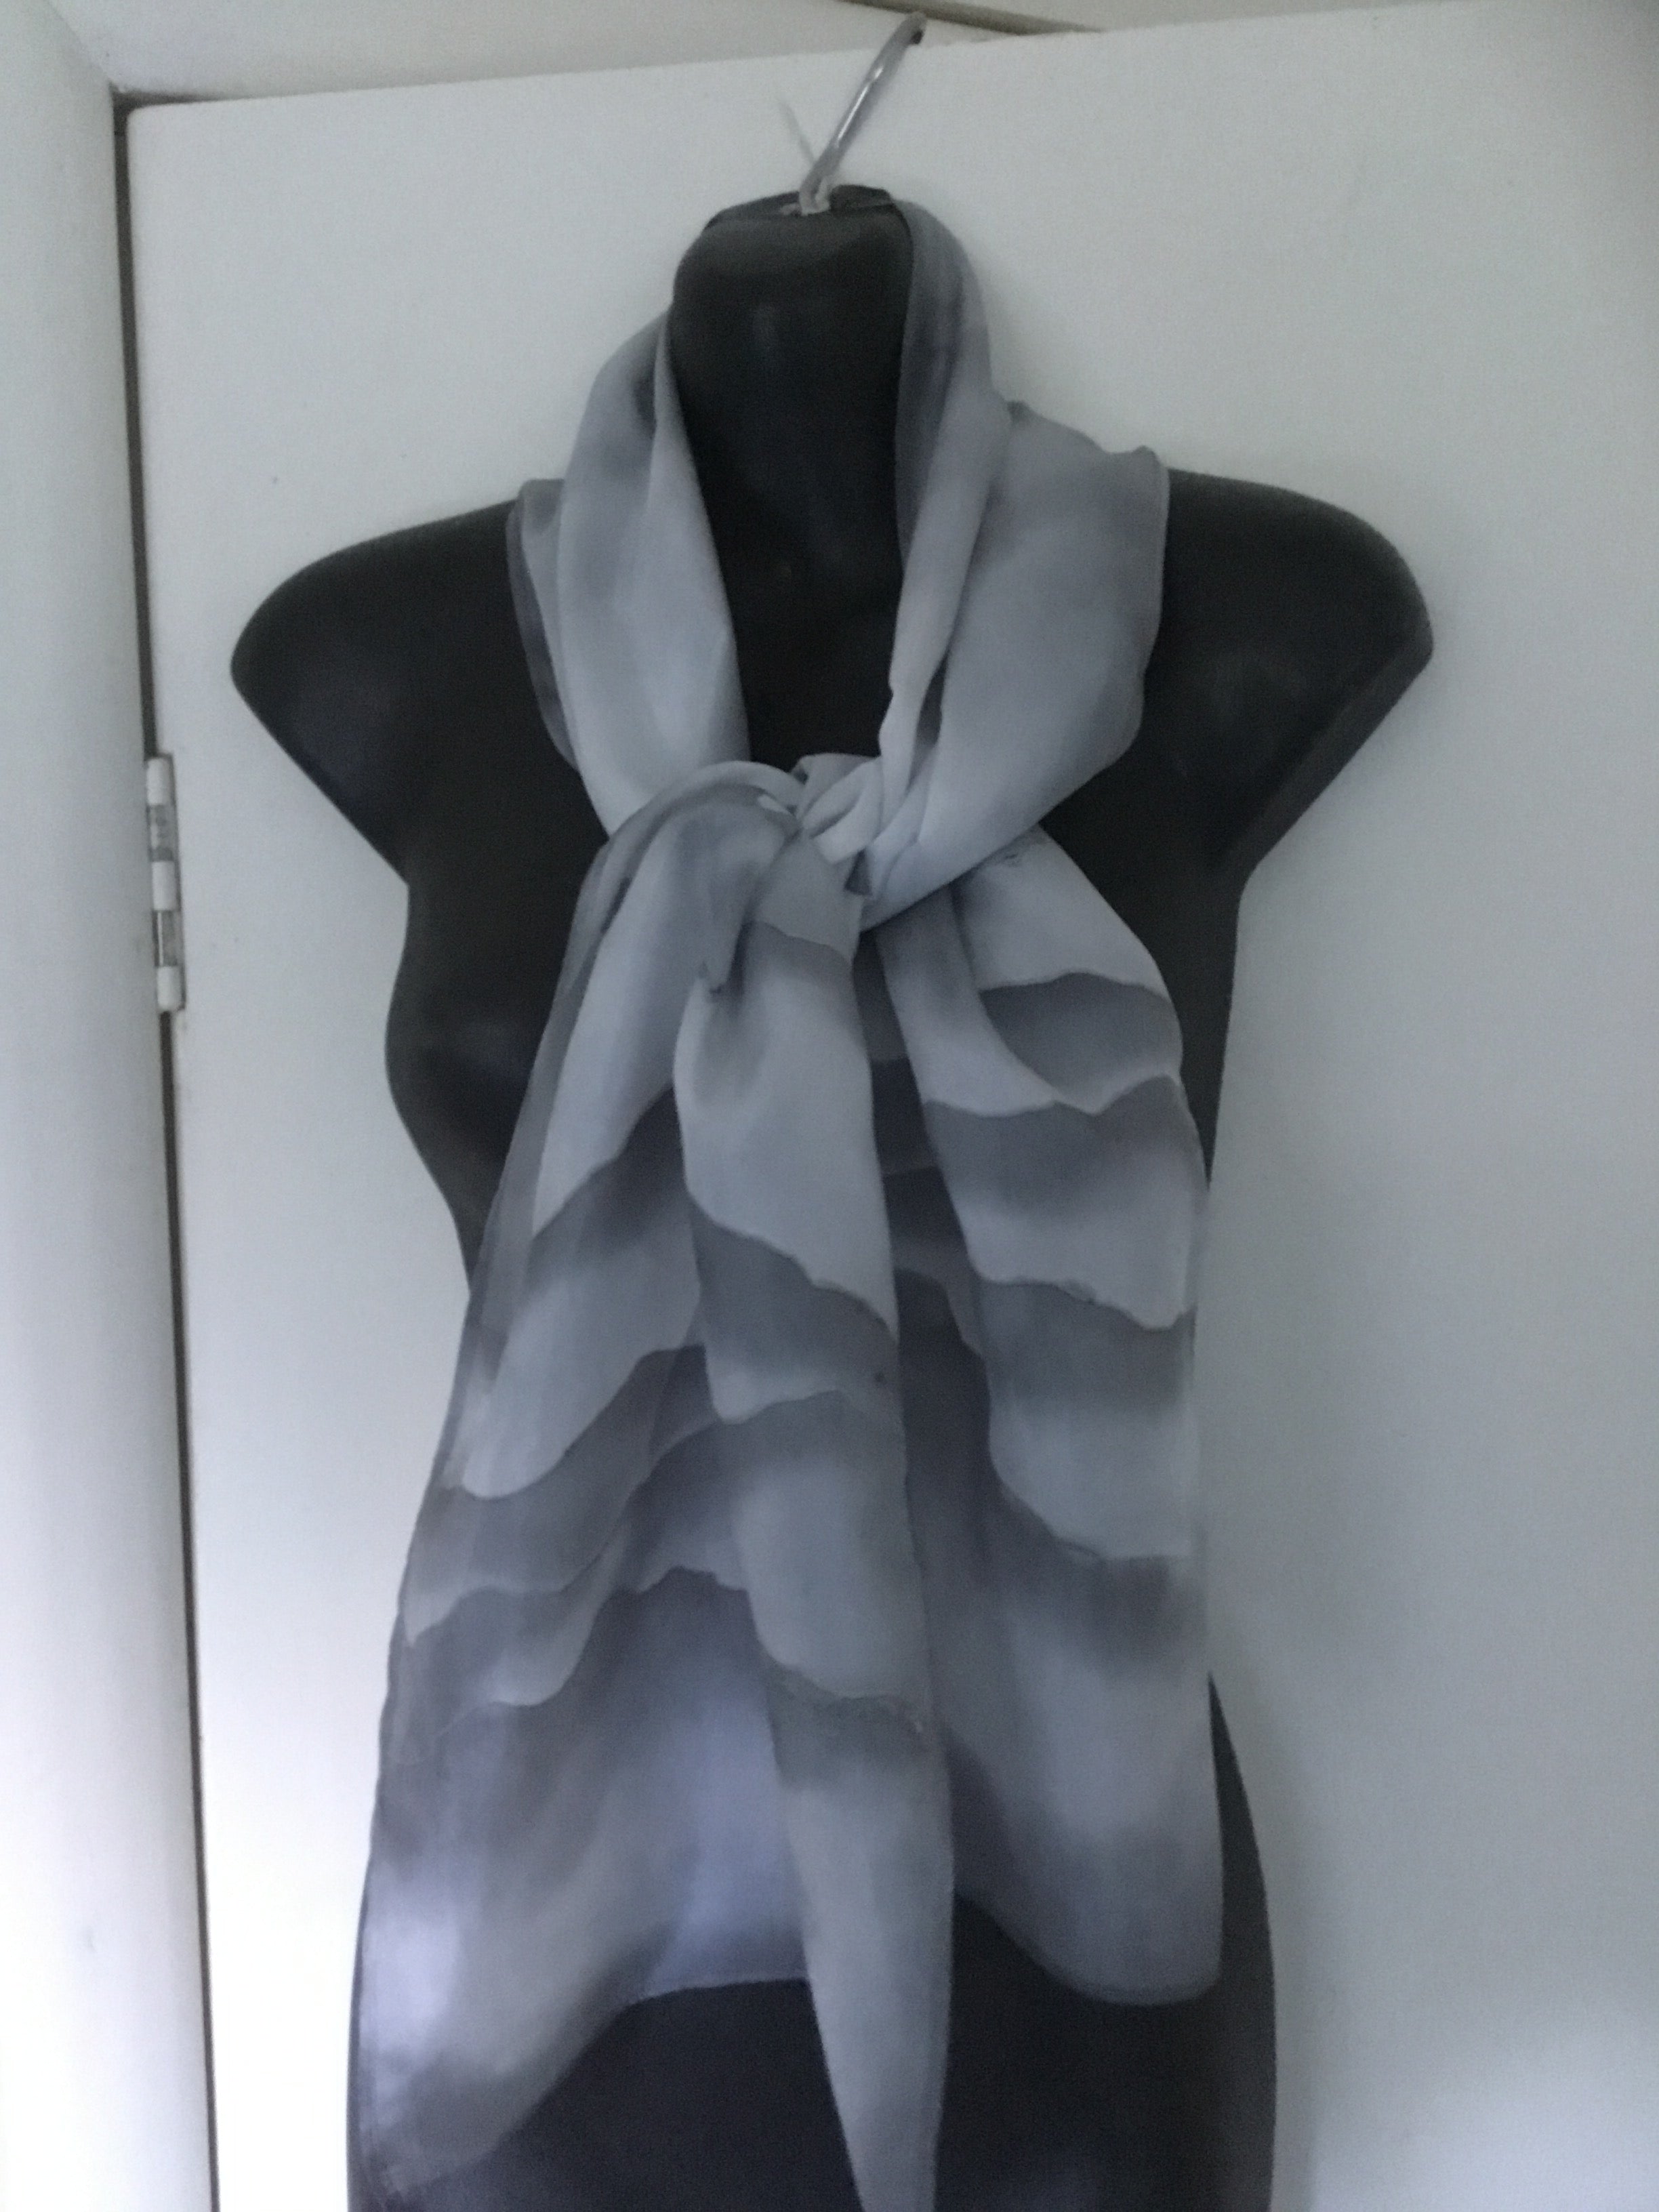 Silver Hills and Clouds- Hand Painted Silk Scarf - Satherley Silks NZ